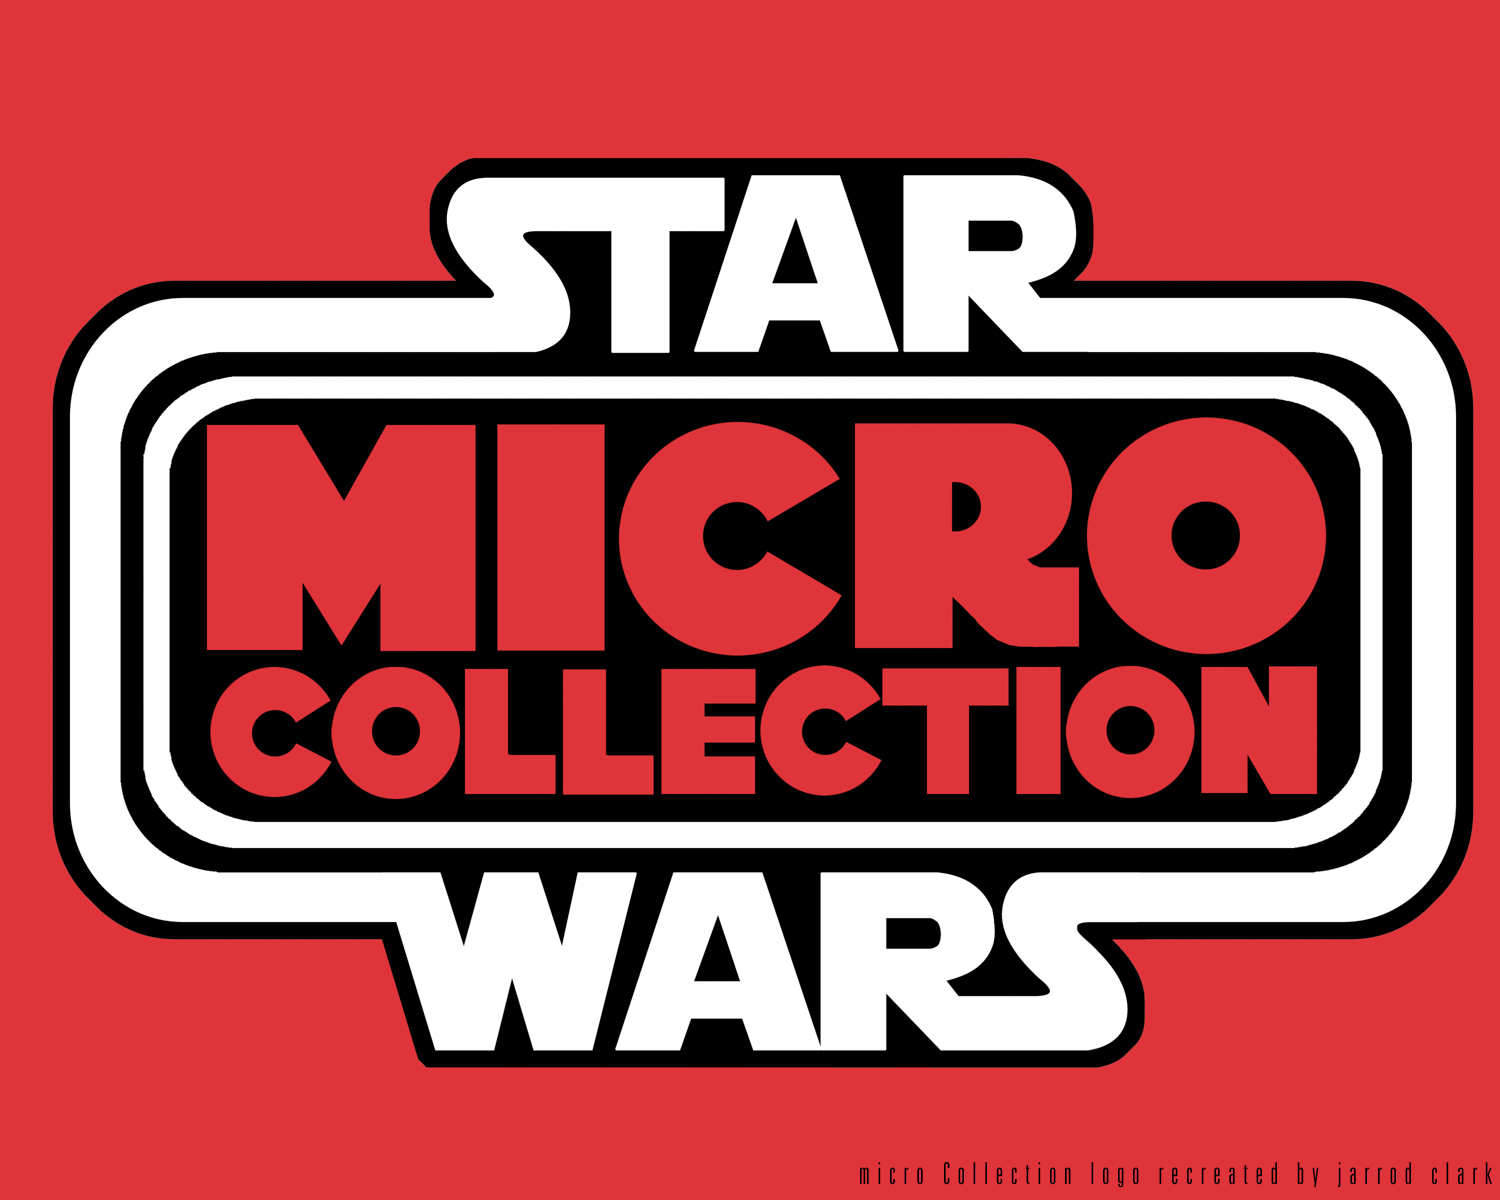 Kim-D-M-Simmons-Classic-Kenner-Star-Wars-Micro-Collection-001.jpg